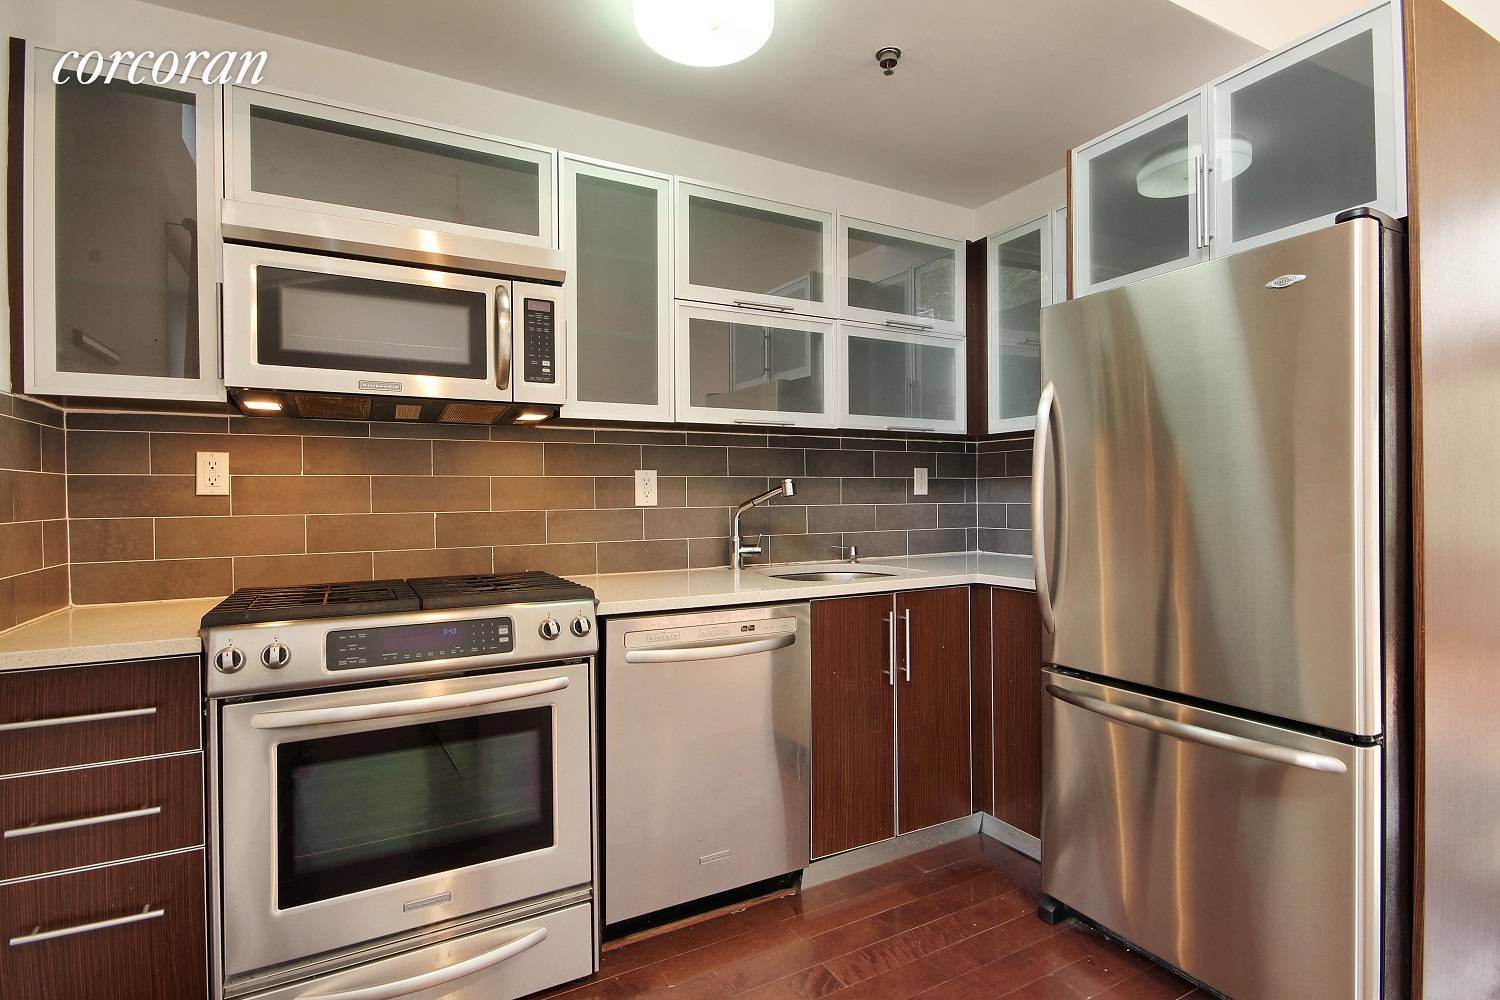 Sleek two bedroom condo located on a lovely tree lined street located in Windsor Terrace.